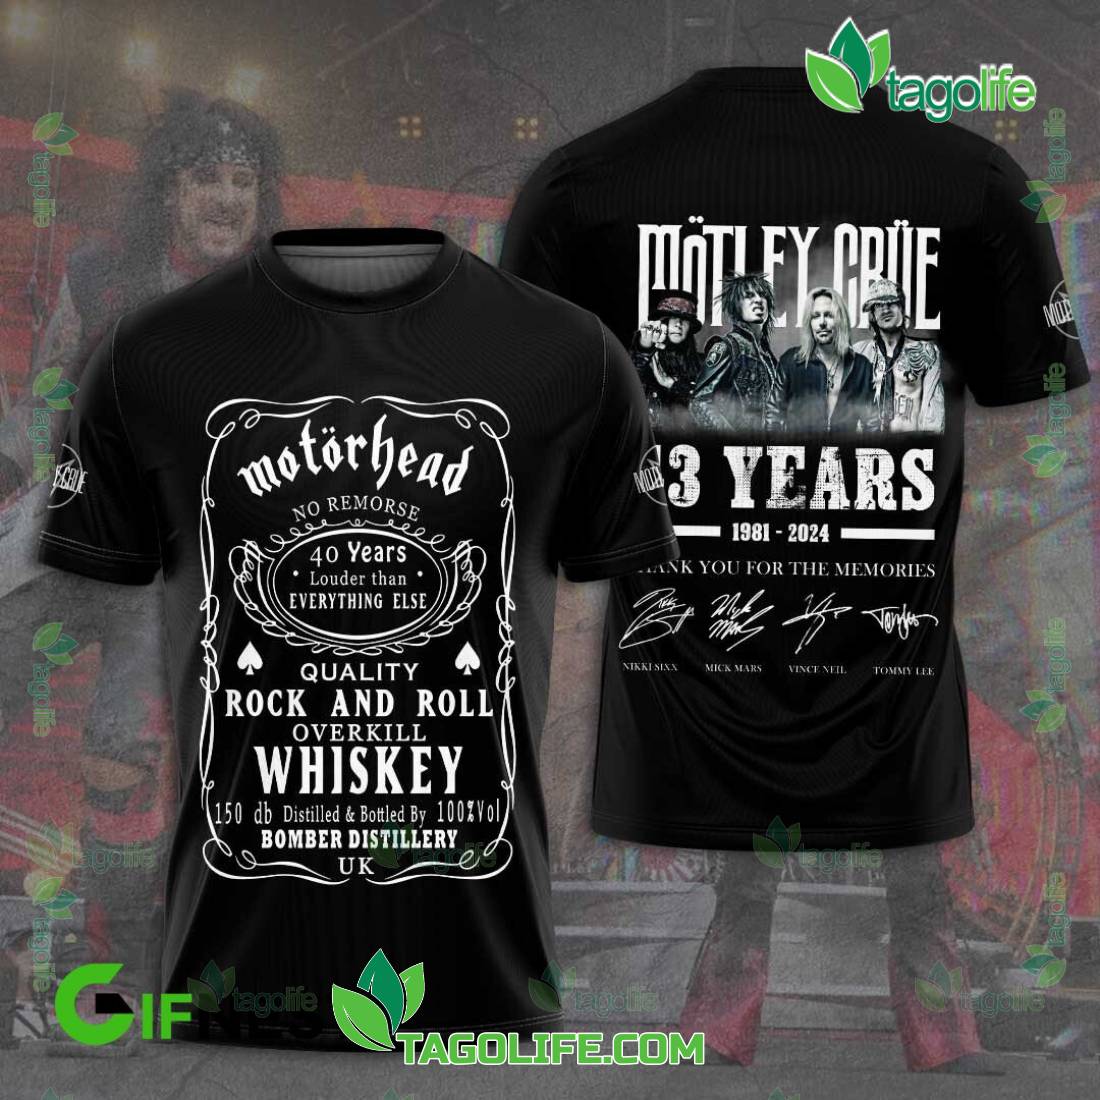 Motley Crue Rock And Roll Overkill Whiskey 43 Year 1981-2024 T-shirt ...